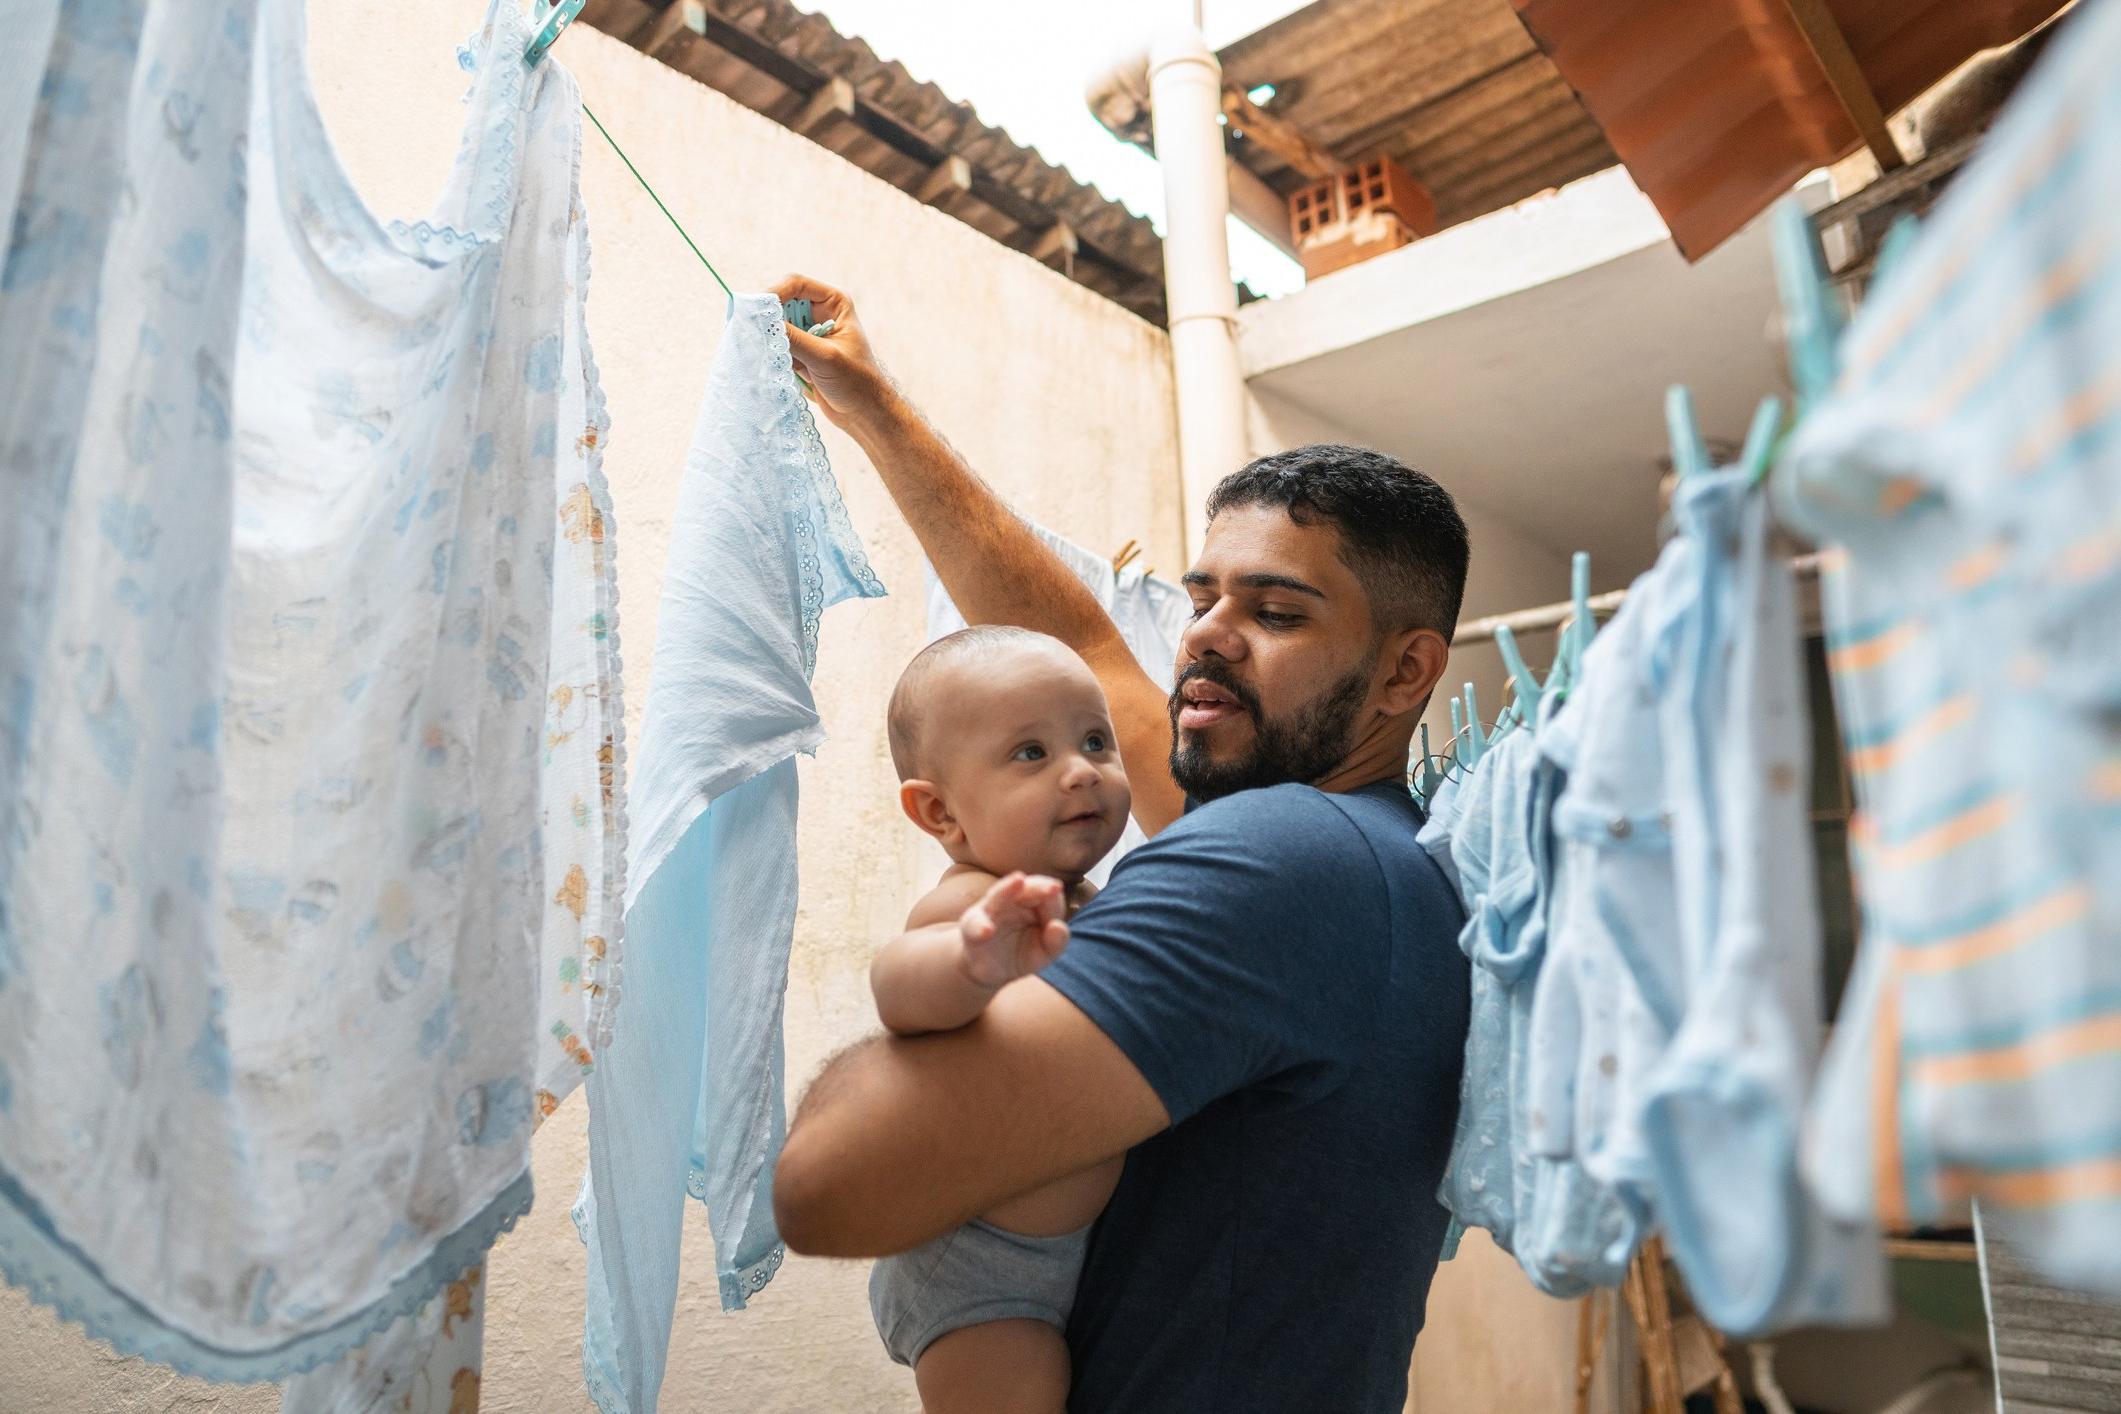 Father line drying clothes while holding a baby